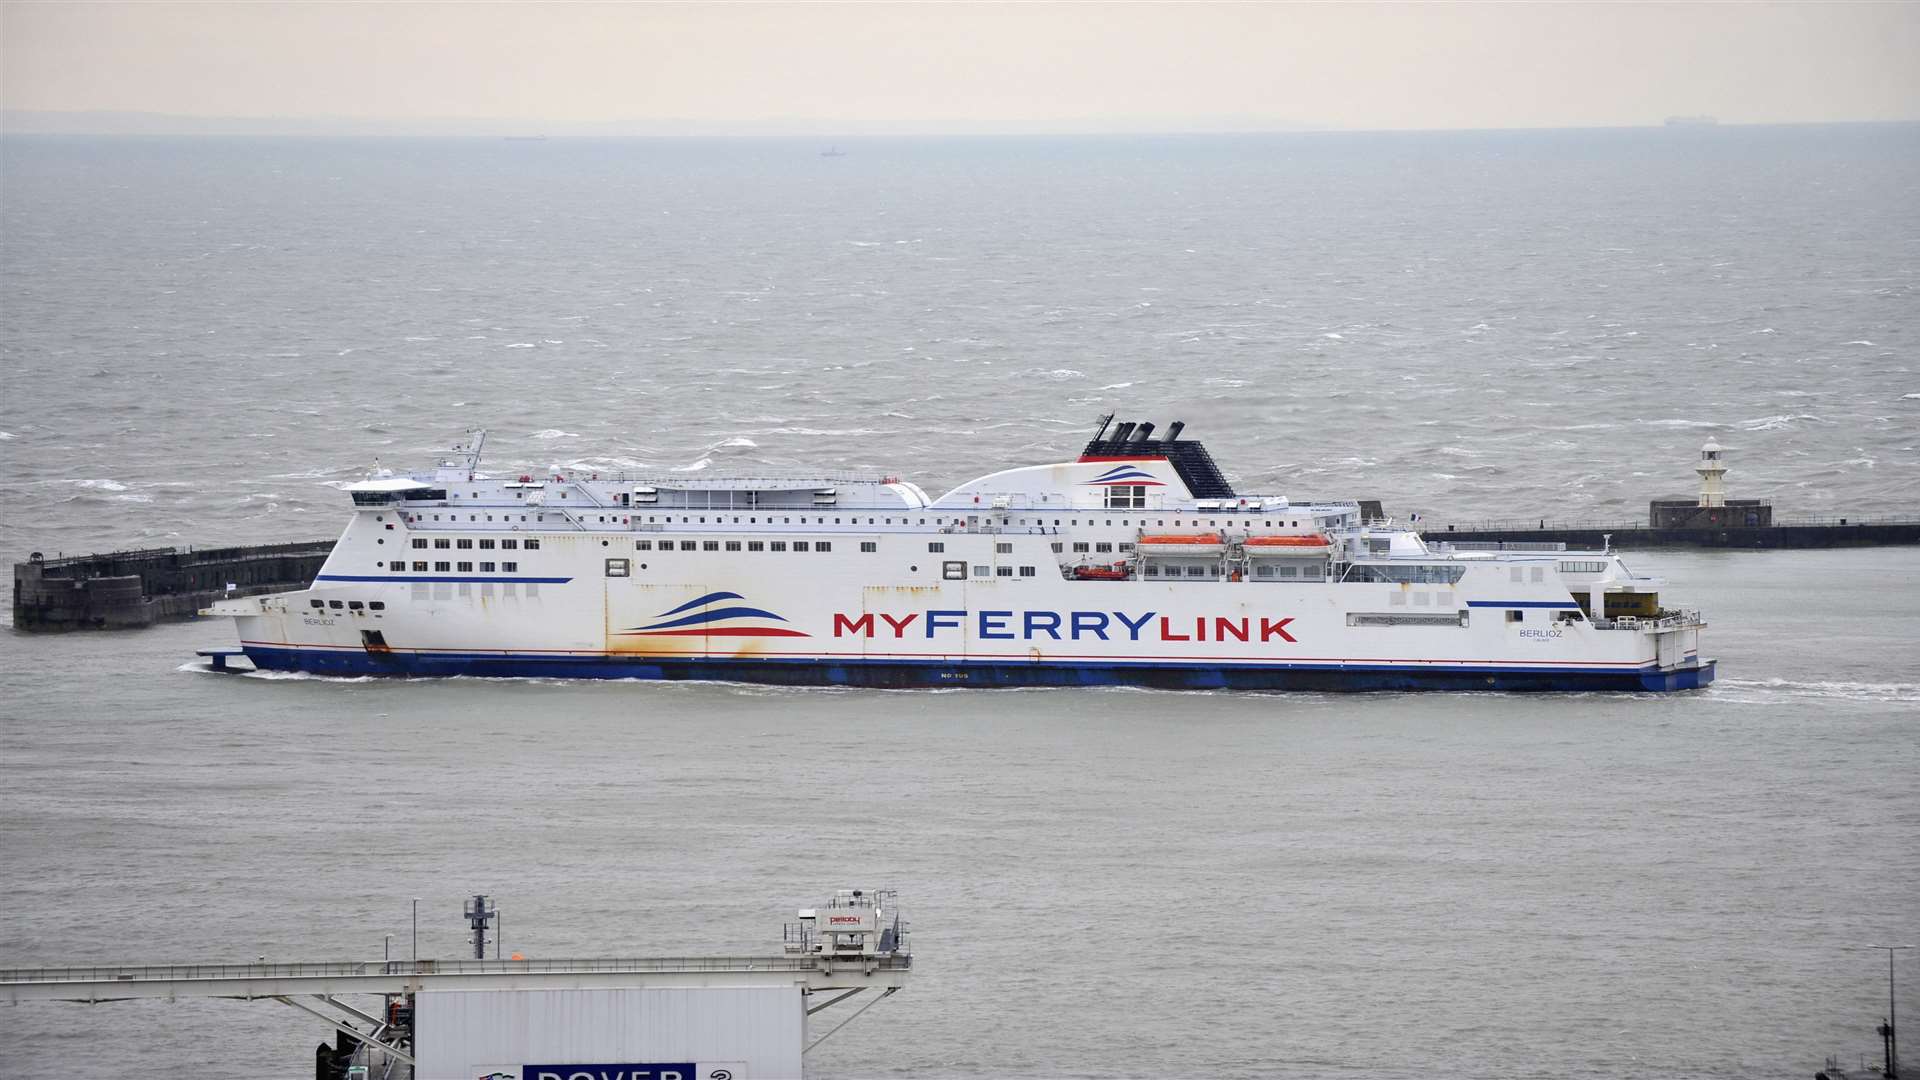 MyFerryLink was owned by Eurotunnel